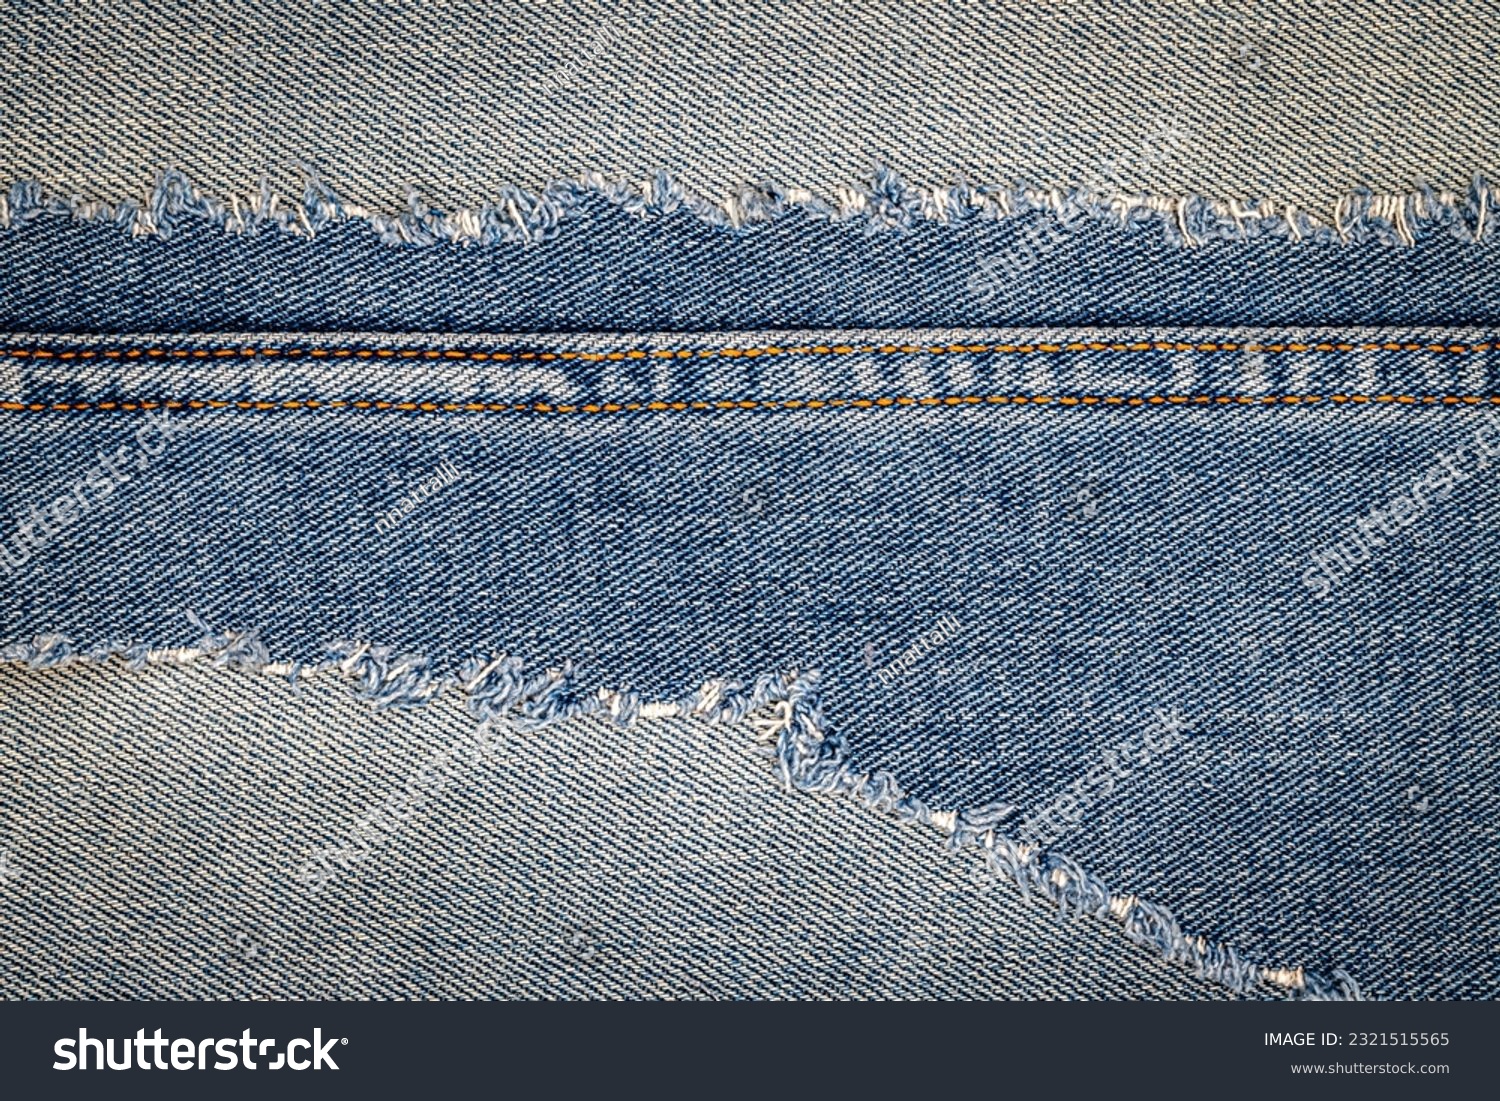 Denim blue jeans fabric frame. Ripped denim fabric. Destroyed torn denim blue jeans patch. Recycle old jeans denim piece. Seam fragment of jeans pants cloth. #2321515565